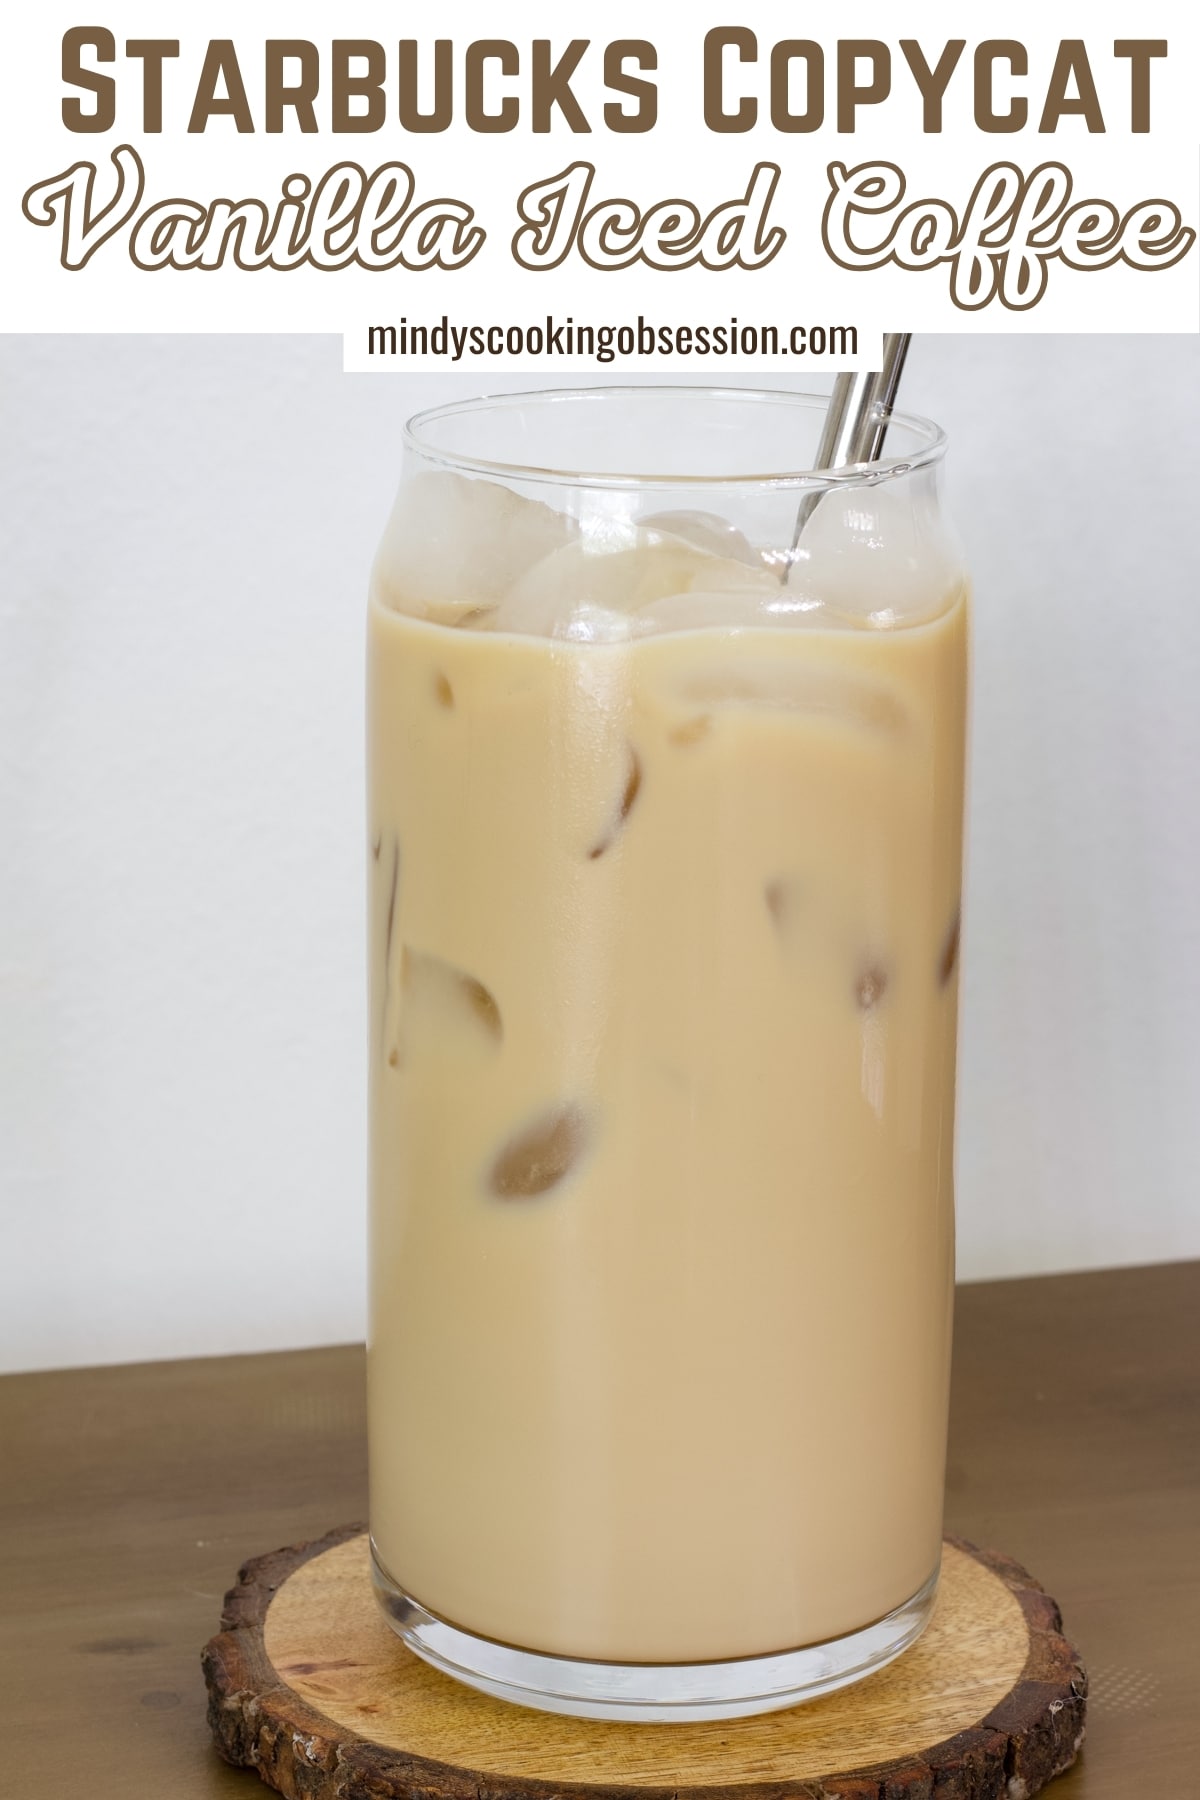 Craving a Starbucks iced vanilla coffee? Save money and make it yourself! Try this easy homemade recipe using strong coffee, vanilla syrup, and cold milk. via @mindyscookingobsession